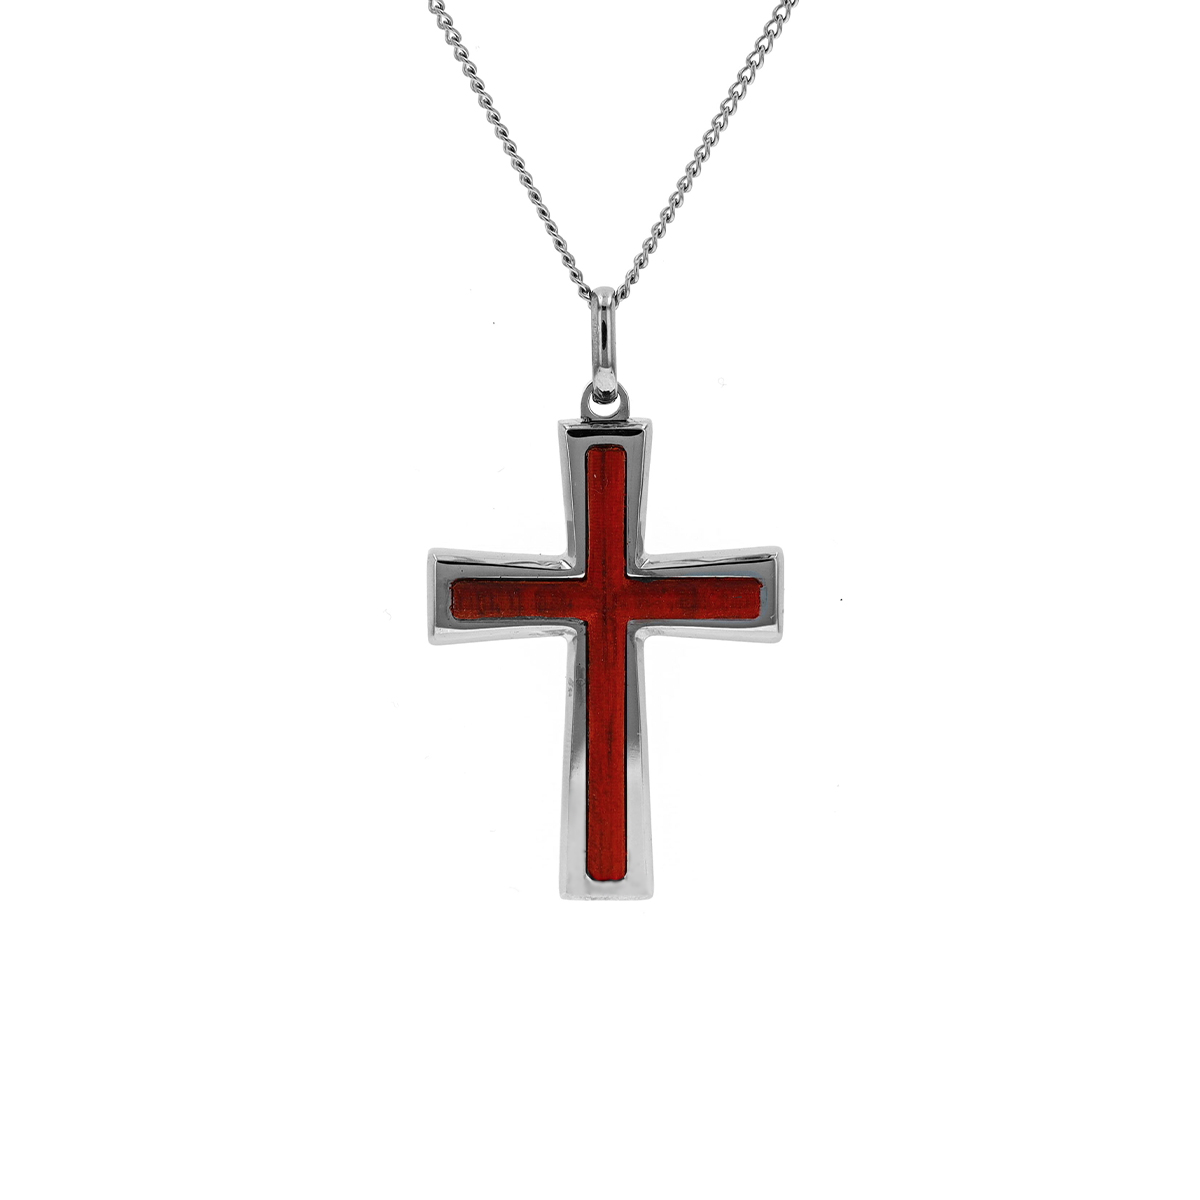 Wooden Cross Pendant and Stainless Steel Chain